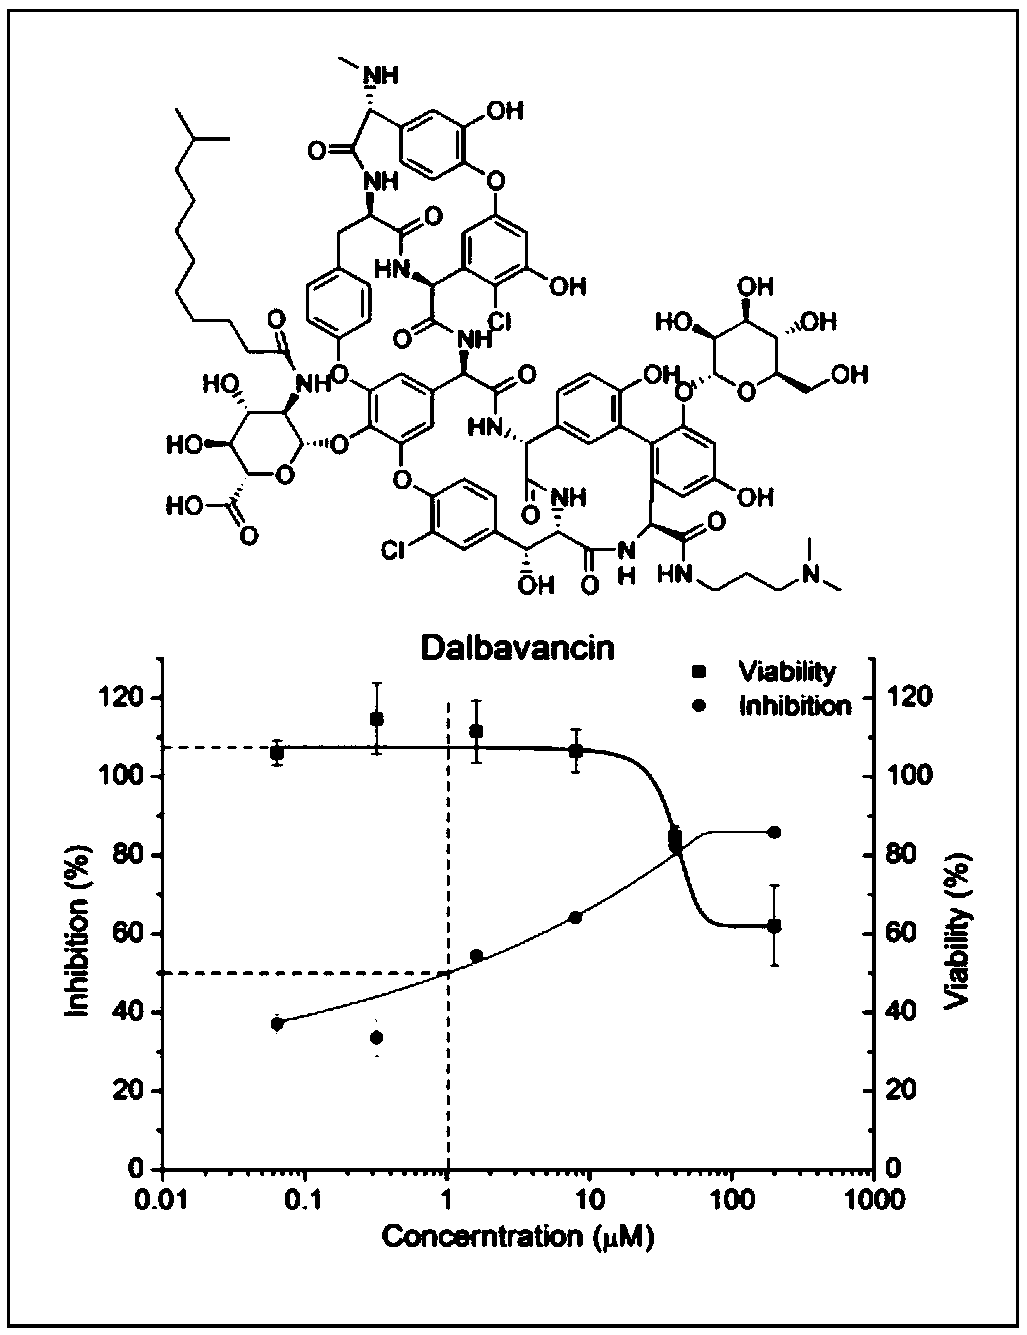 Application of dalbavancin in the preparation of drugs for treating AIDS